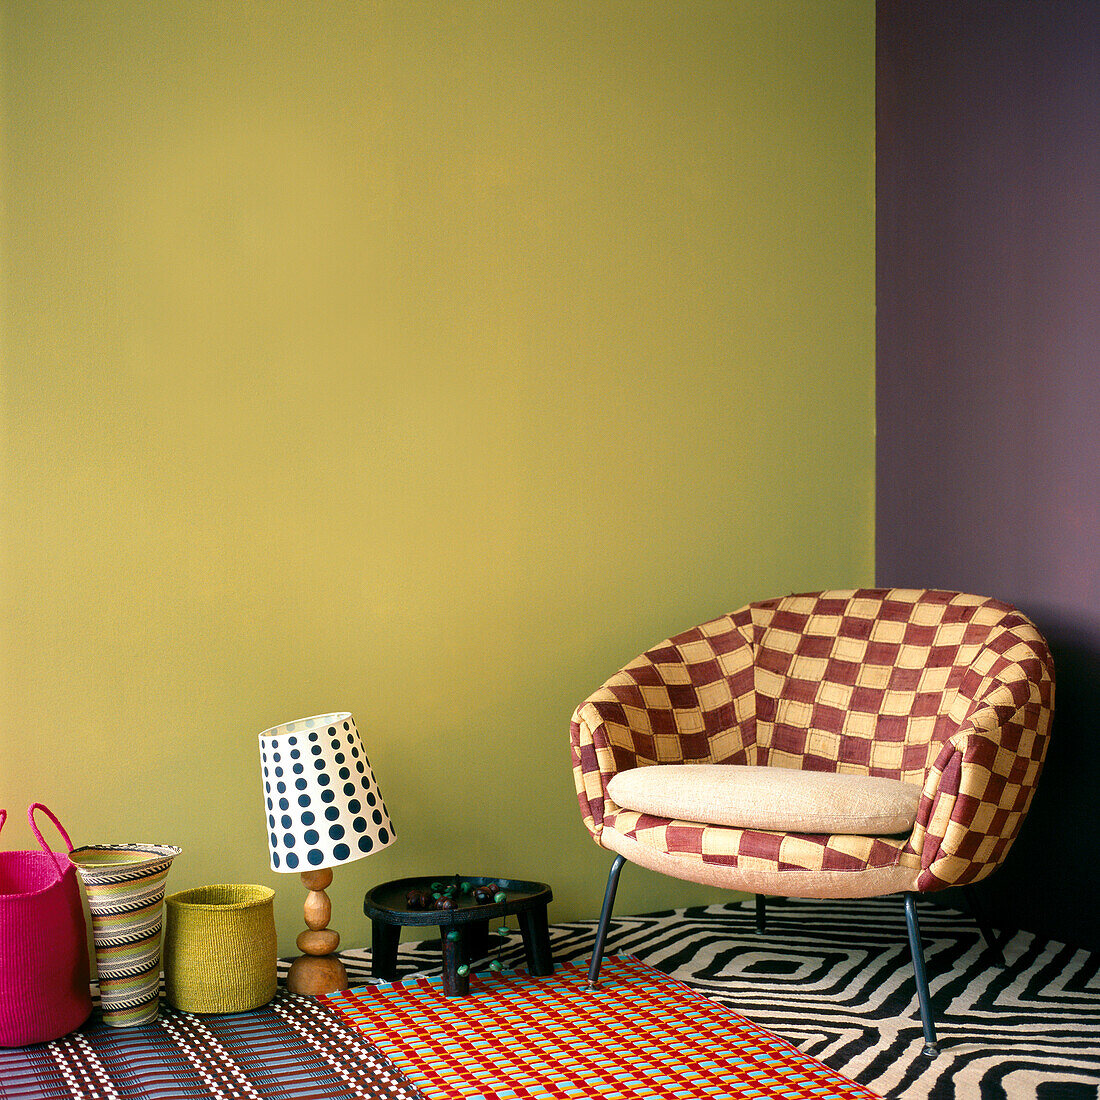 Living room with checked patterned armchair painted walls patterned carpet with rugs and and colourful home wares